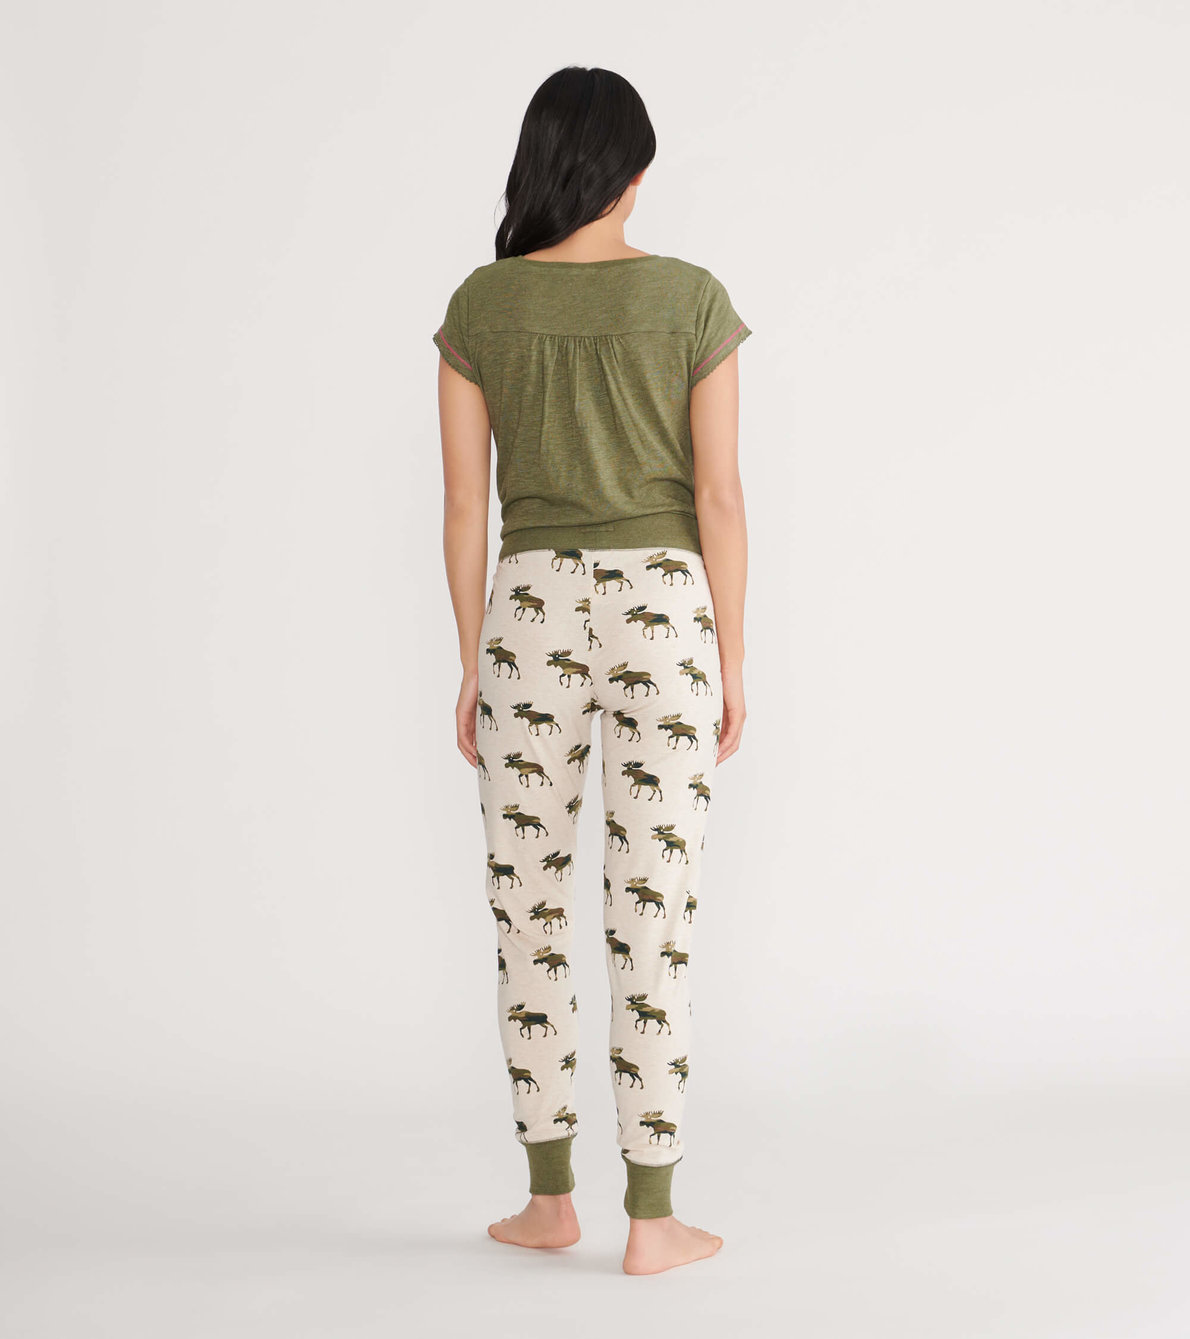 View larger image of Camooseflage Women's Tee and and Leggings Pajama Separates